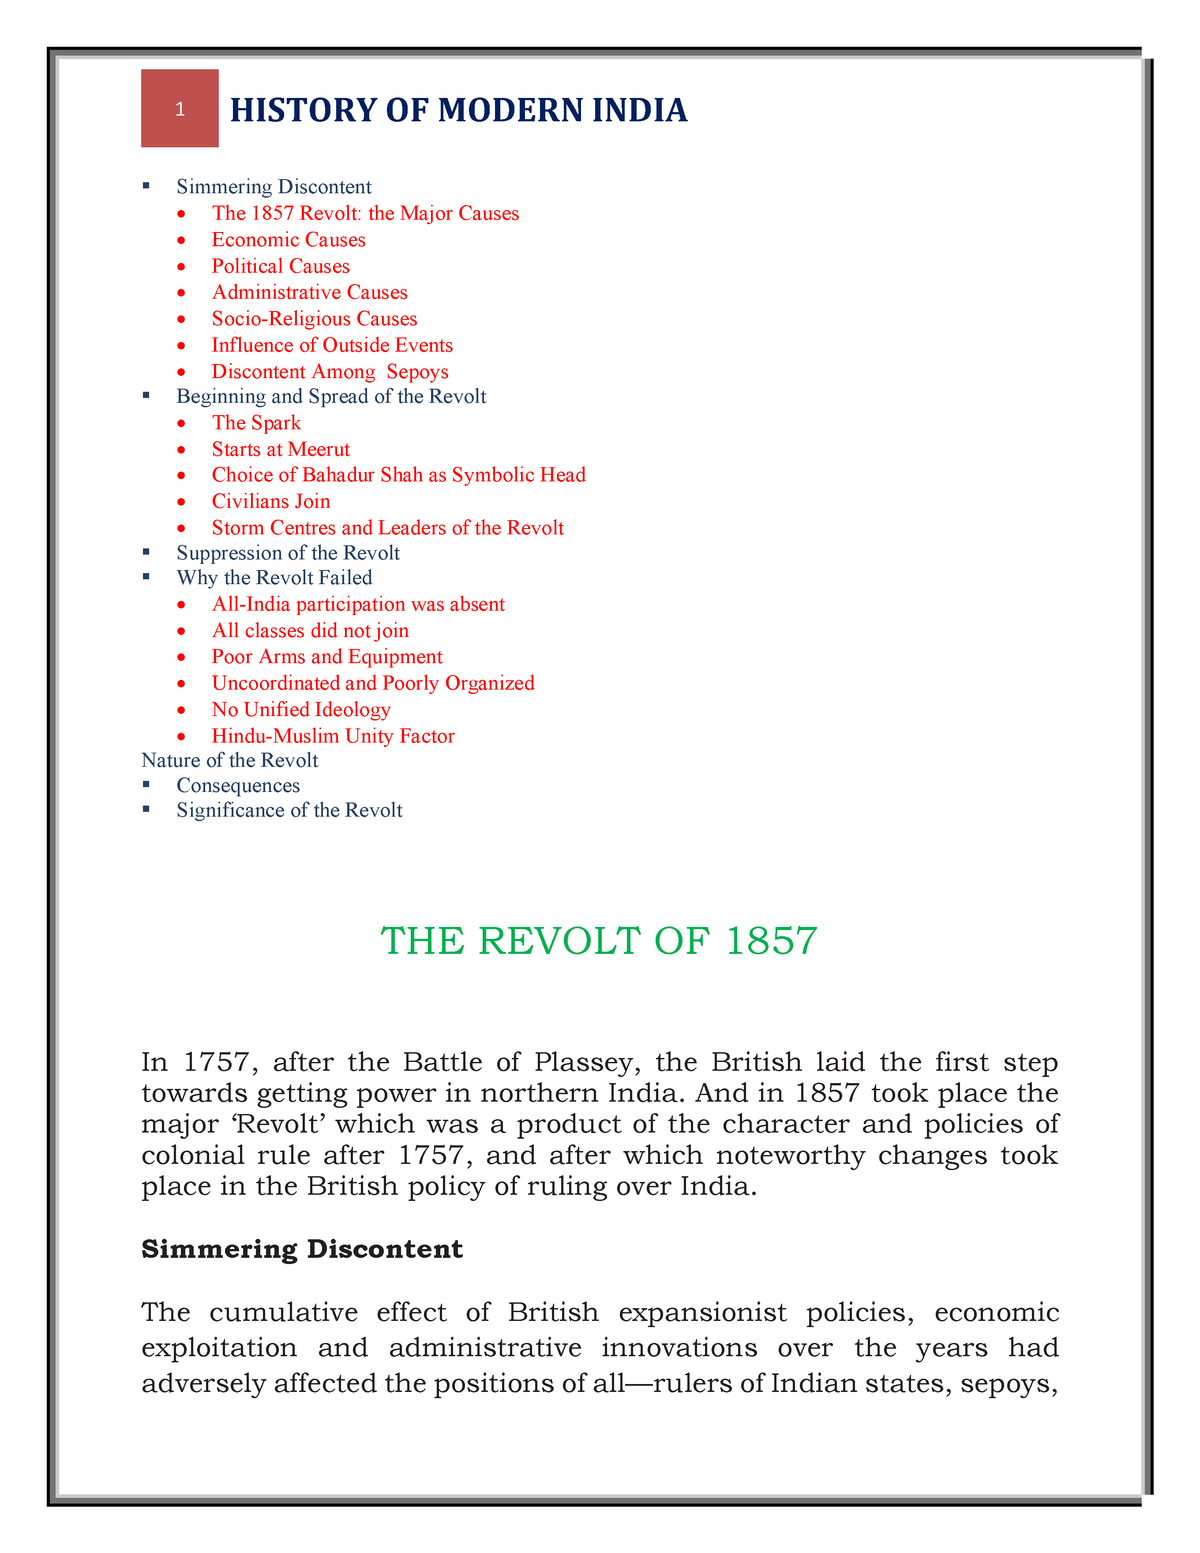 essay.on revolt of 1857 in 500 words